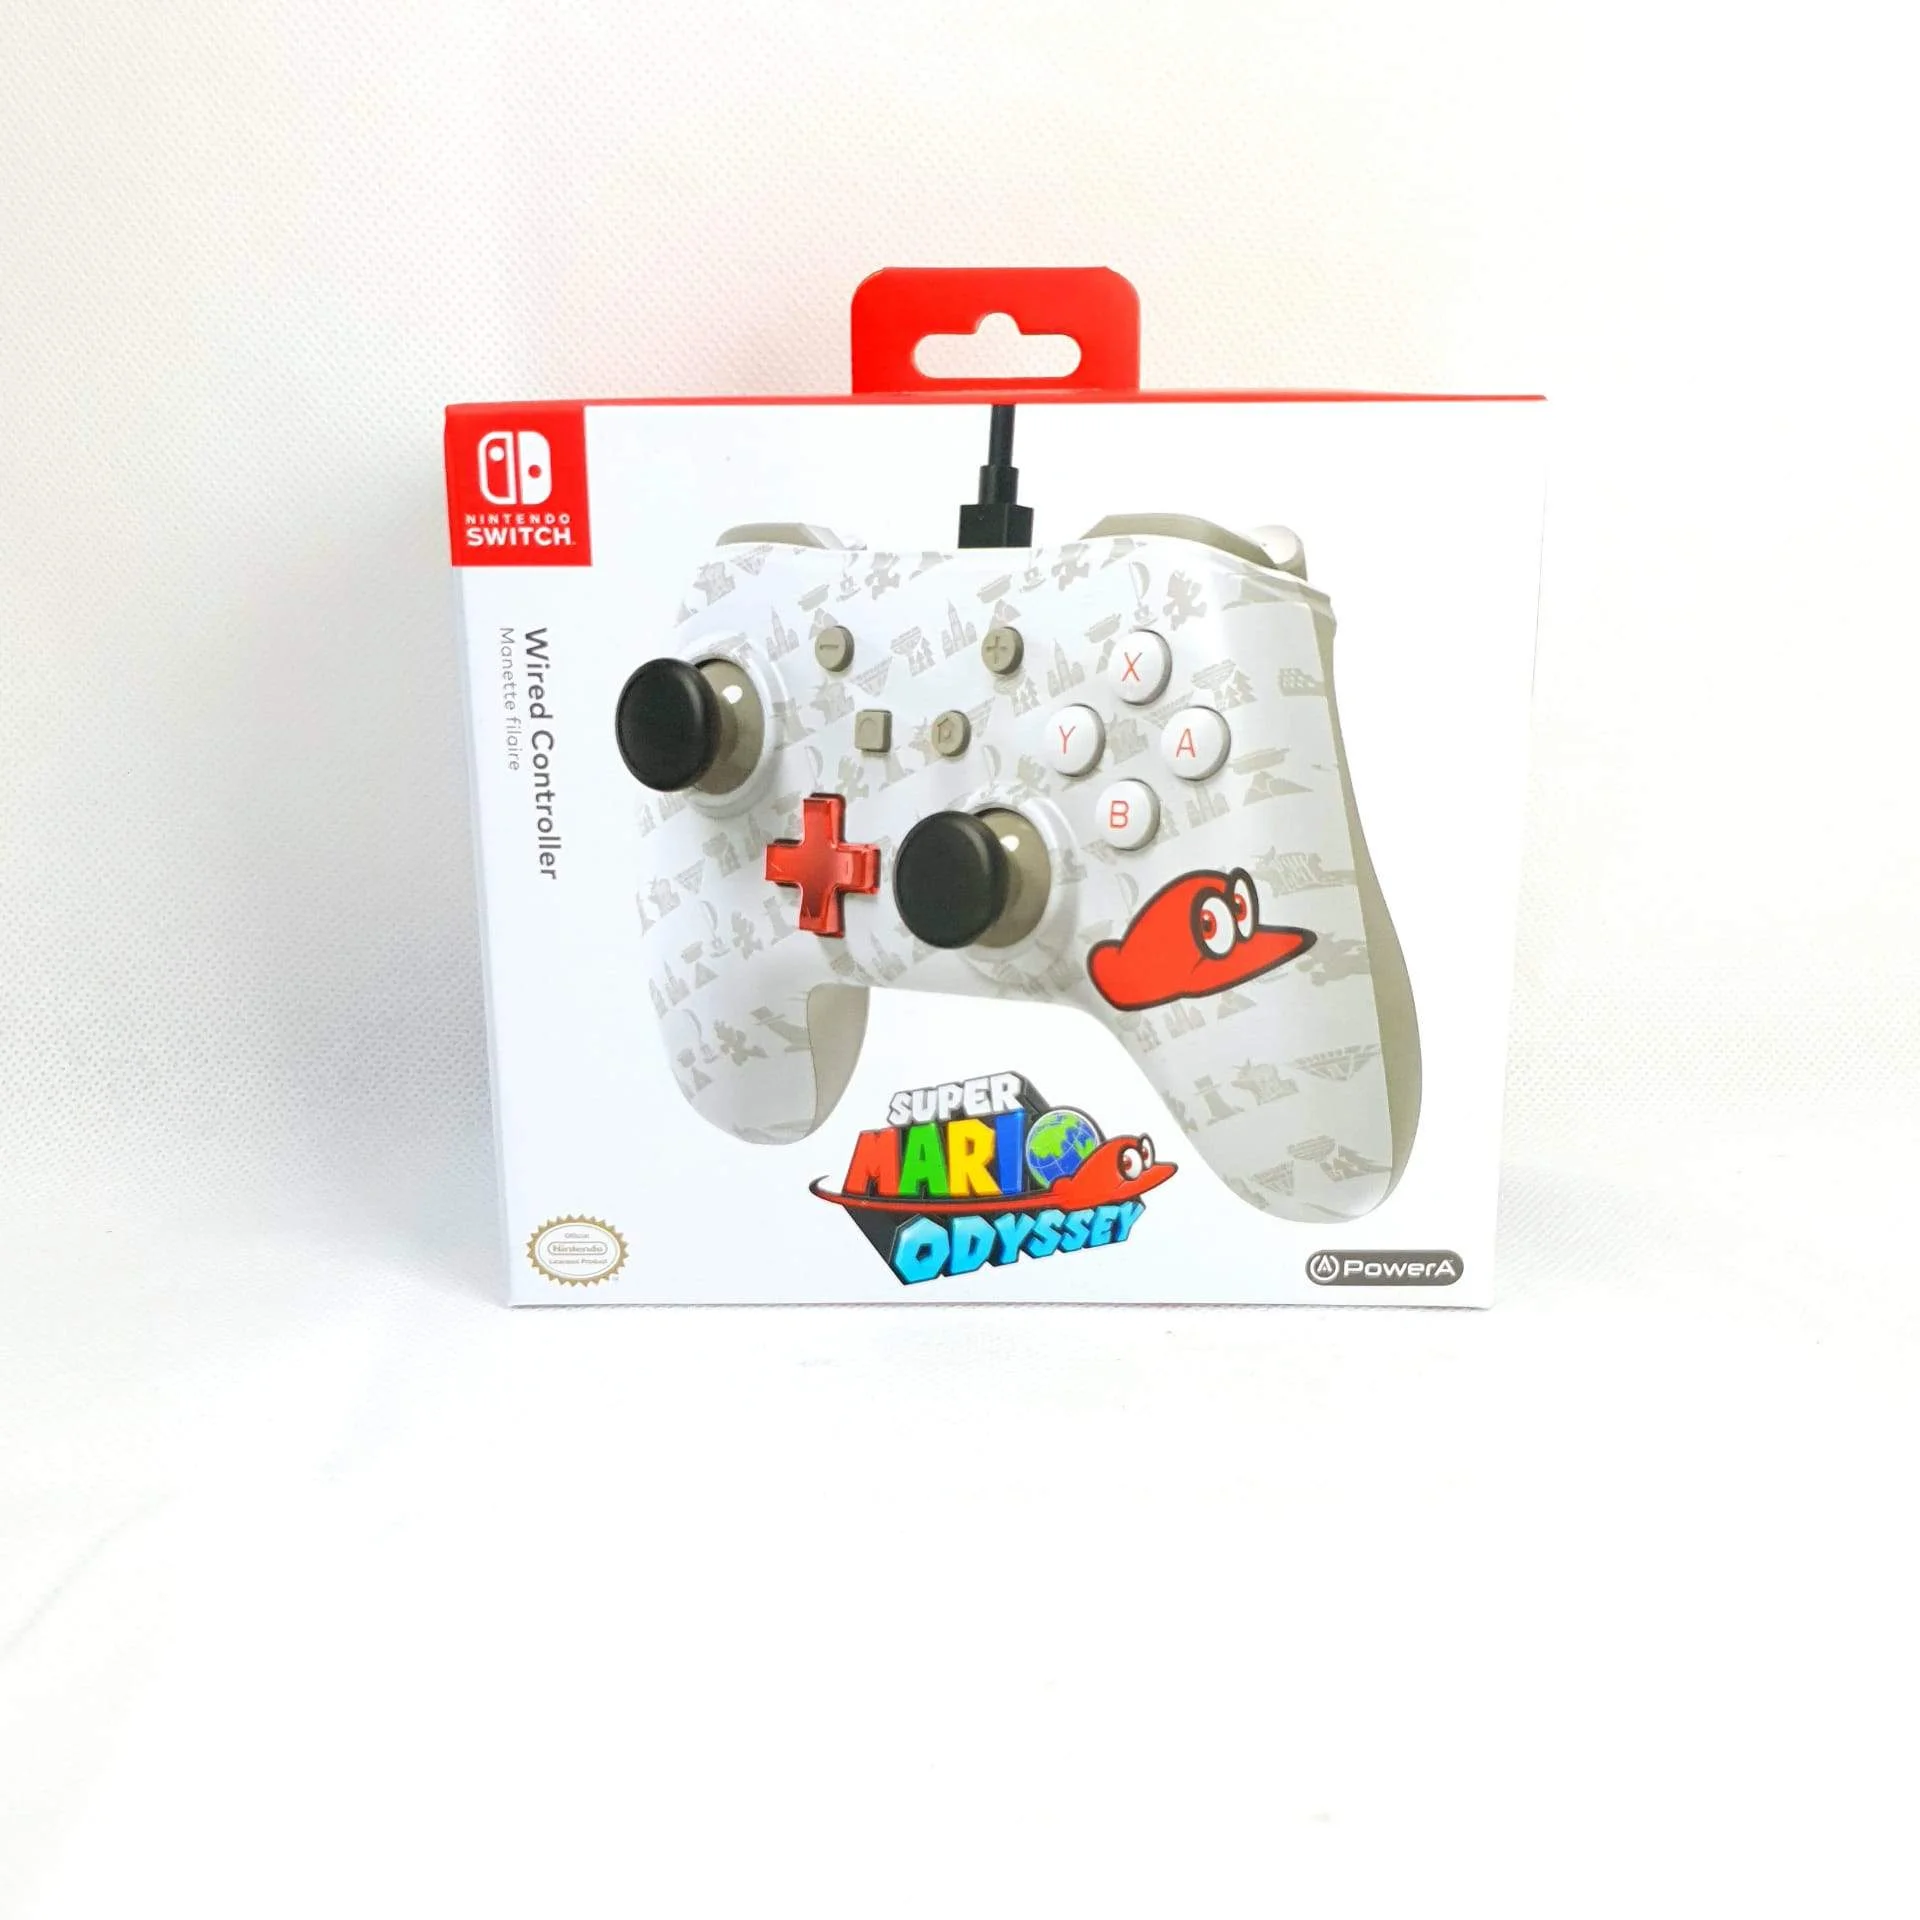  Power A Switch Super Mario Odyssey White Controller